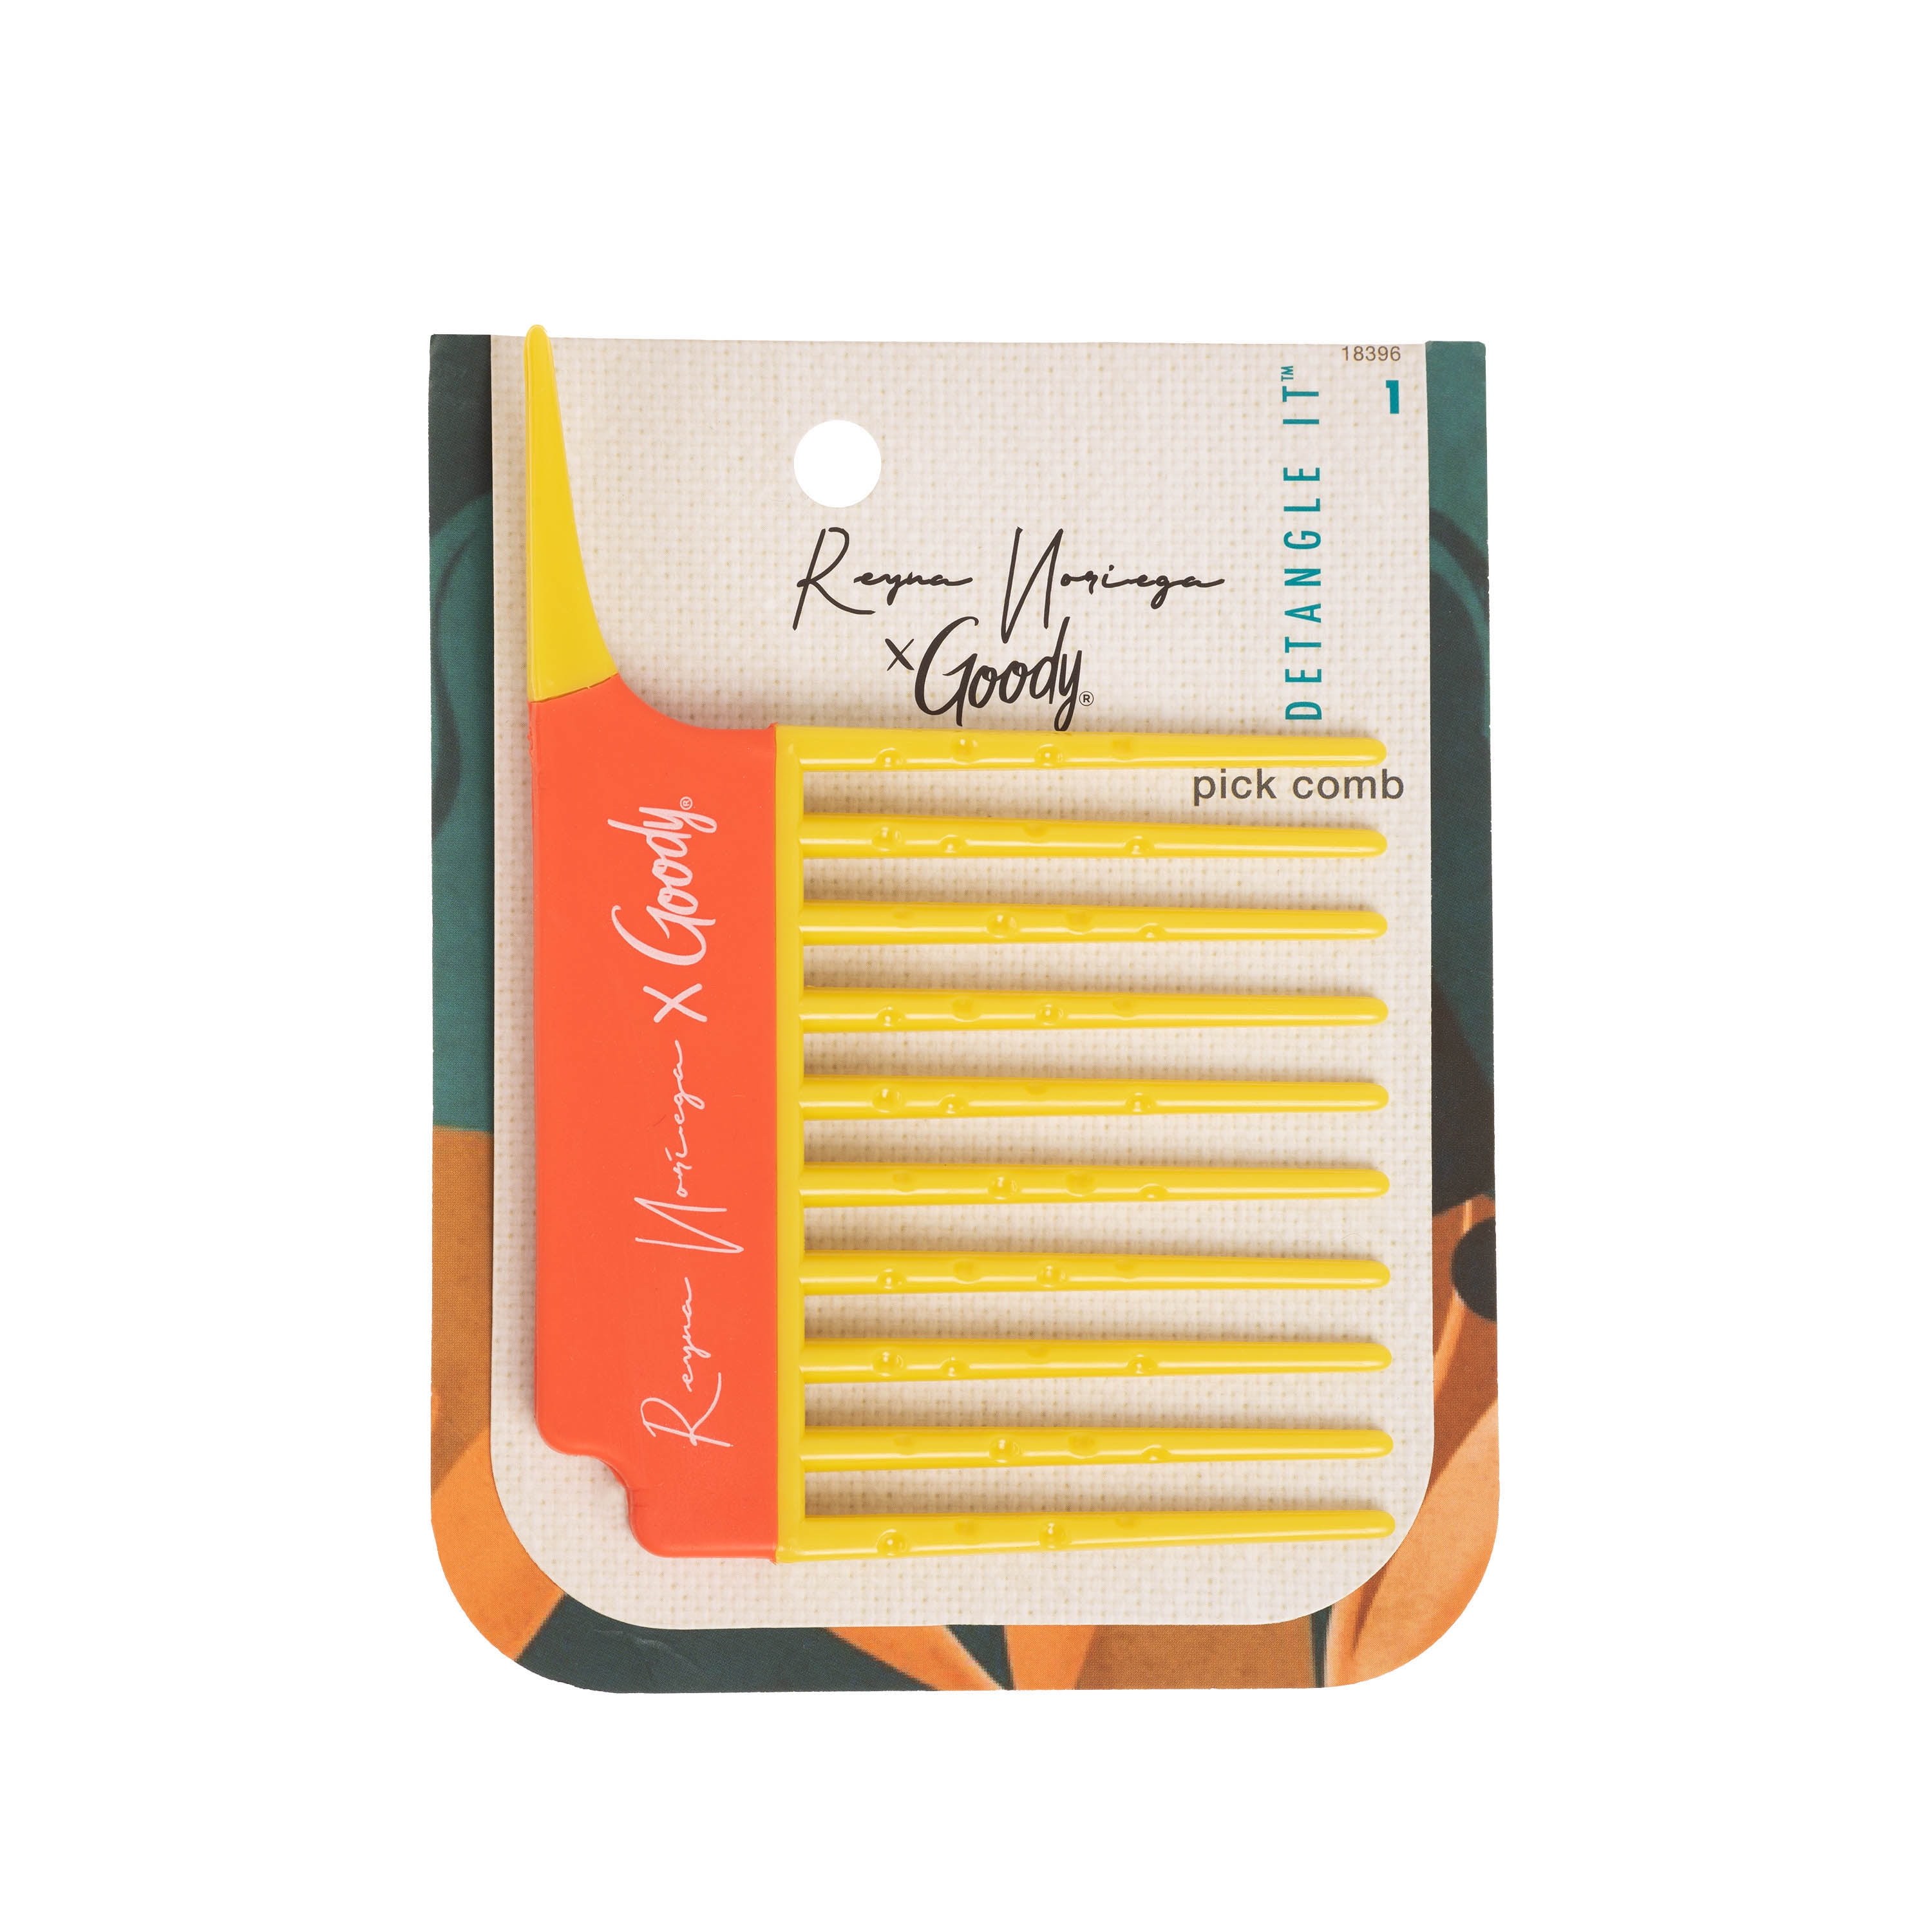 Goody Tru X Reyna Noriega Collab Ouchless® Detangling Pick Comb Yellow, 1 CT